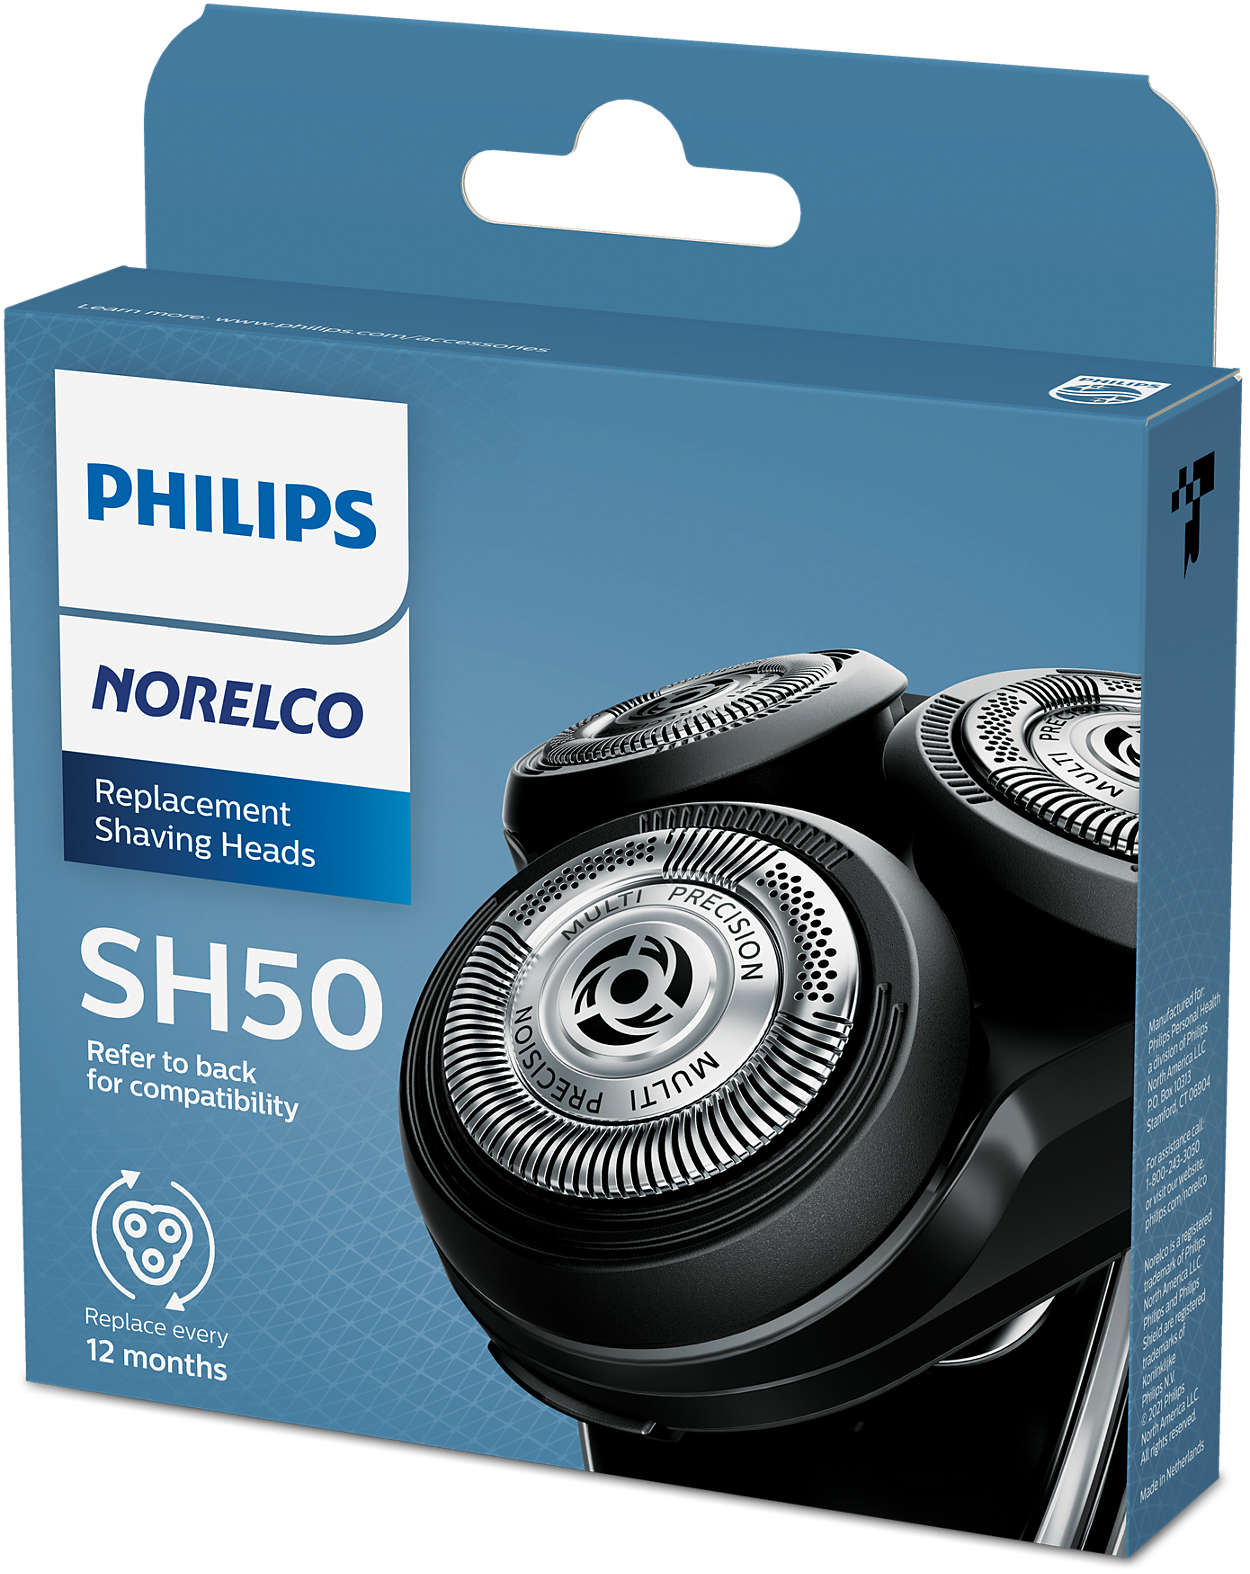 Philips SH50 5000 Replacement Heads Norelco Series Shaving